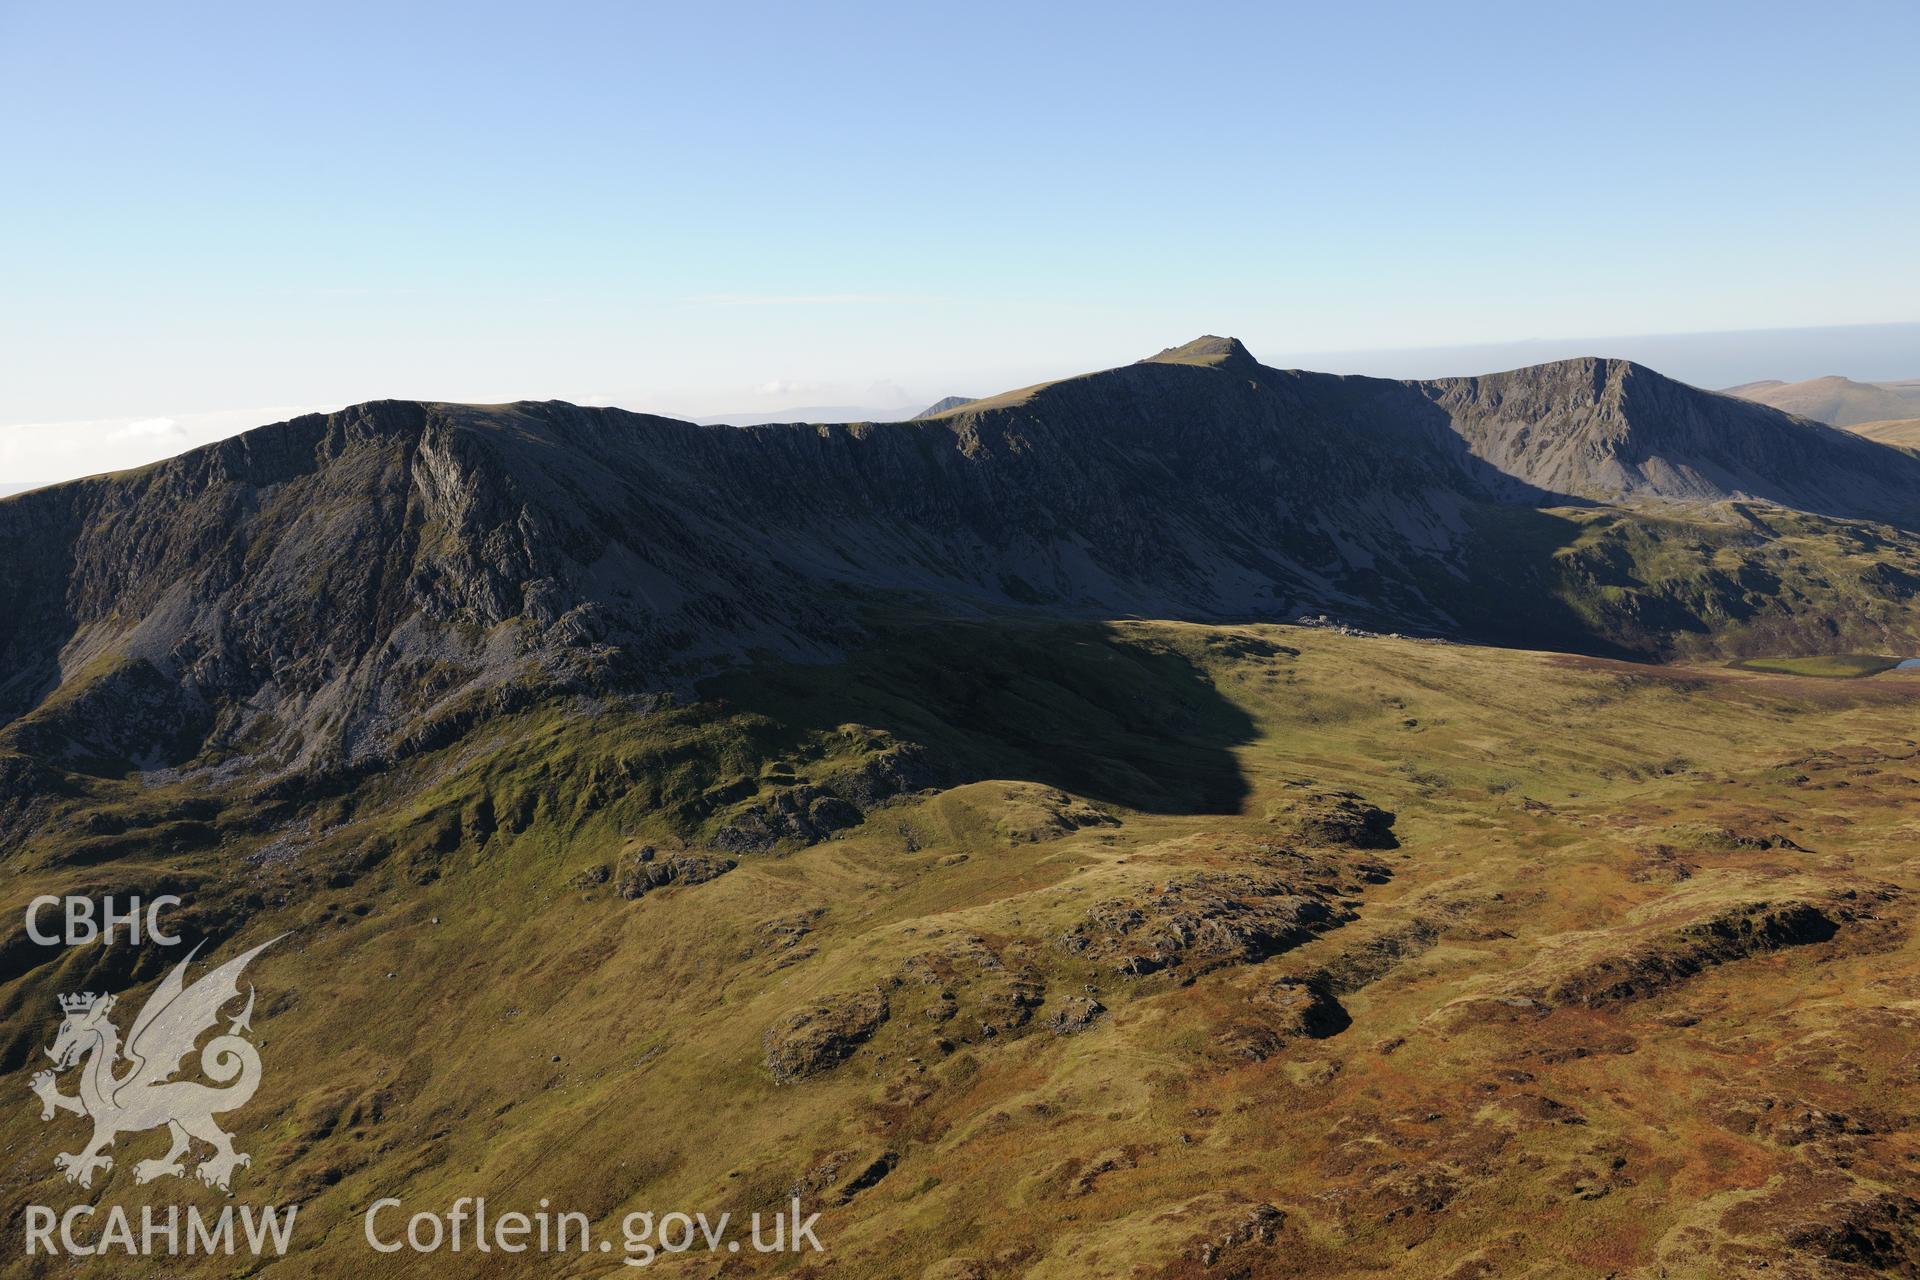 Cadair Idris ridge from the north. Oblique aerial photograph taken during the Royal Commission's programme of archaeological aerial reconnaissance by Toby Driver on 2nd October 2015.